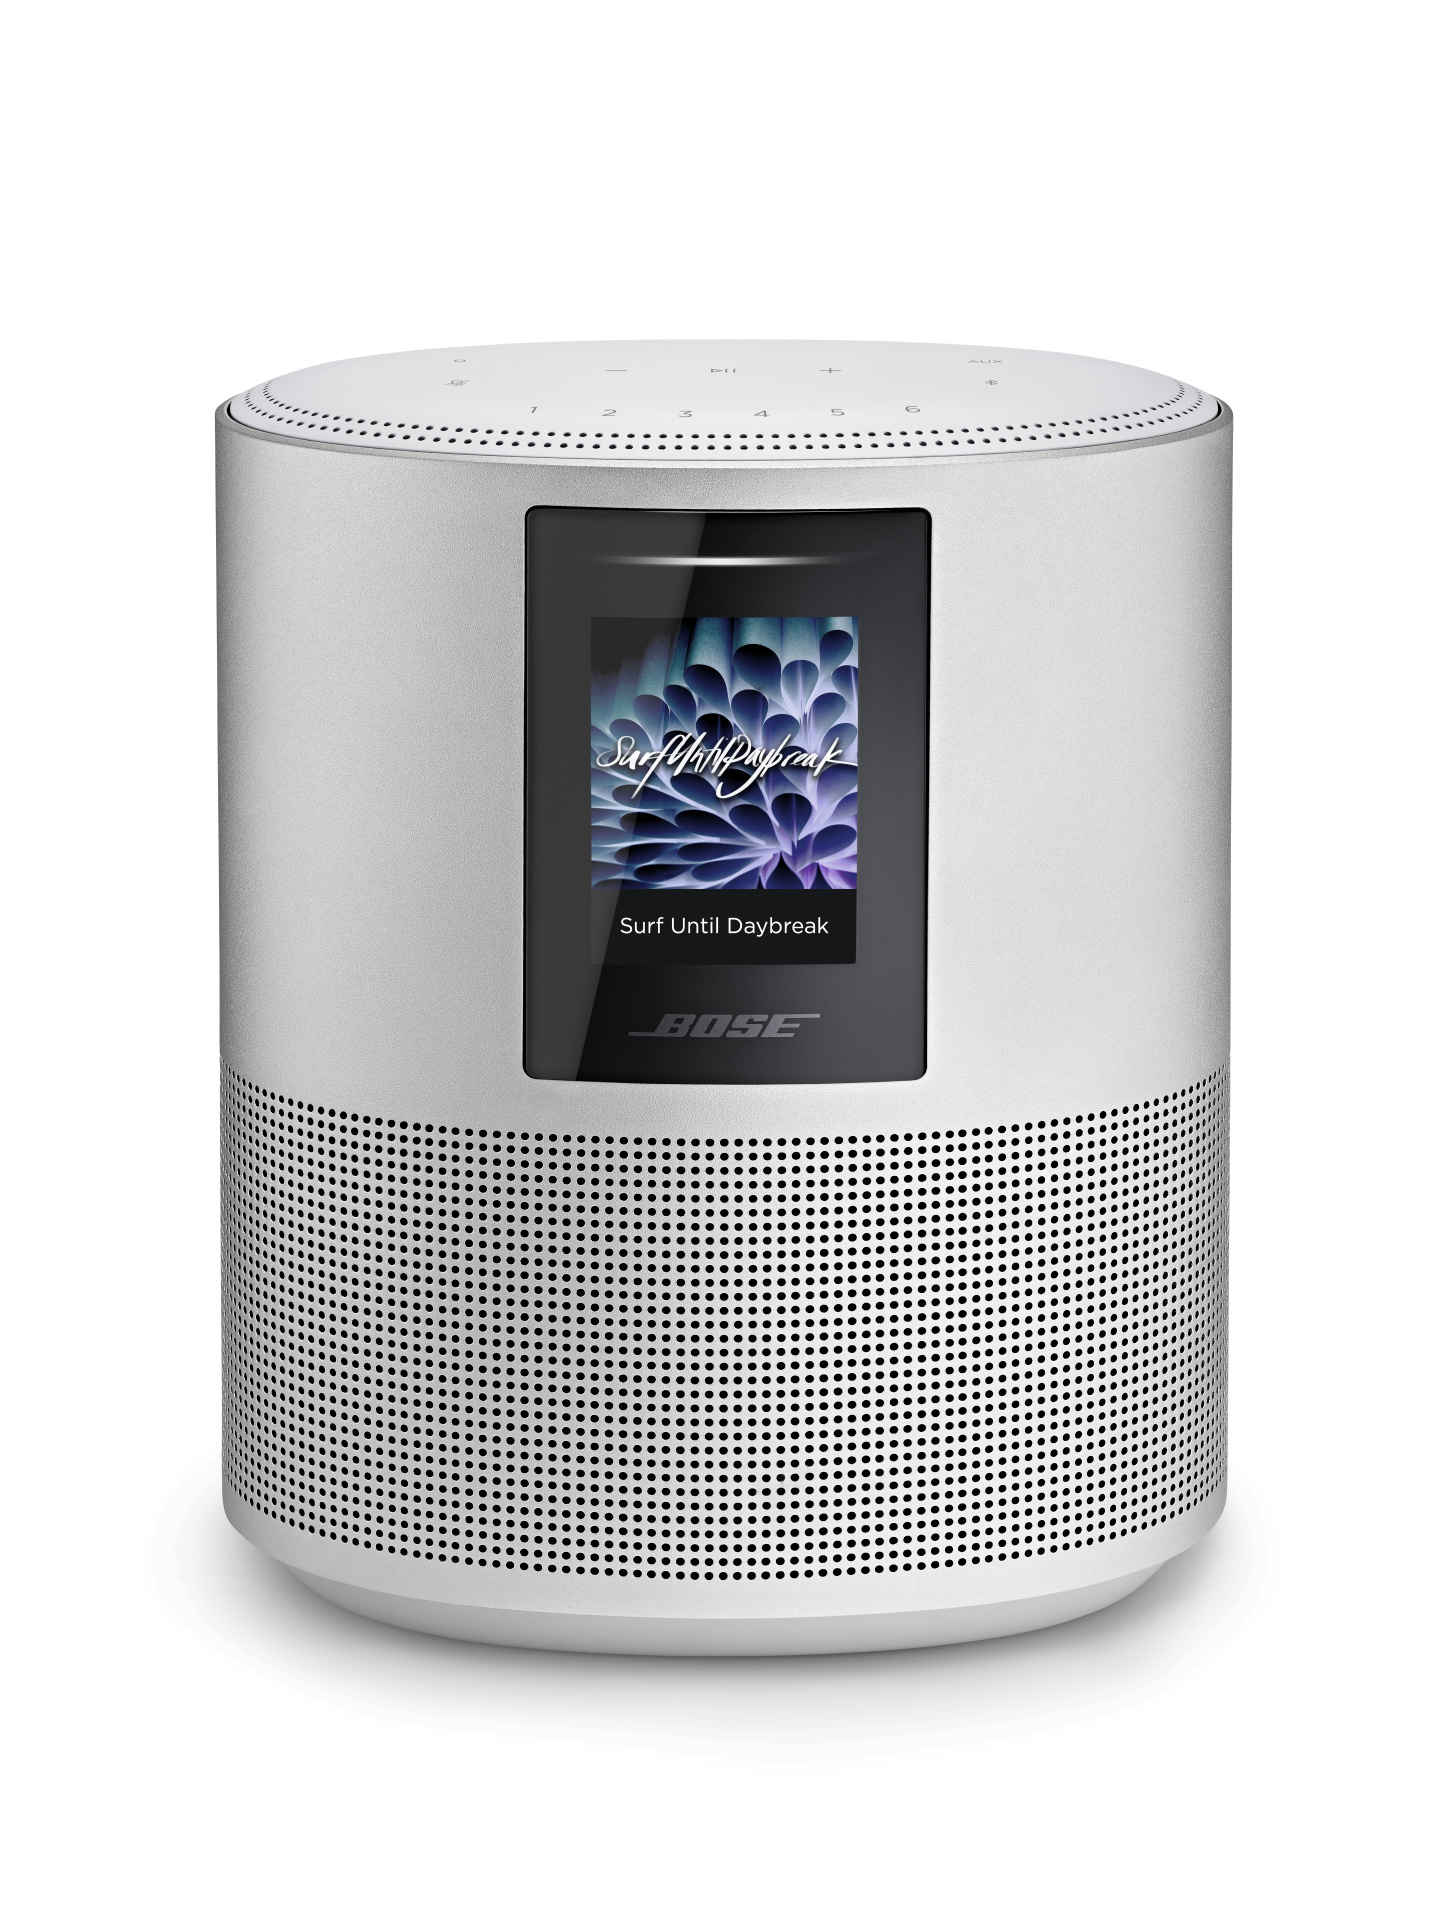 Bose Smart Speaker 500 with Wi-Fi, Bluetooth and Voice Control Built-in, Silver - image 1 of 6